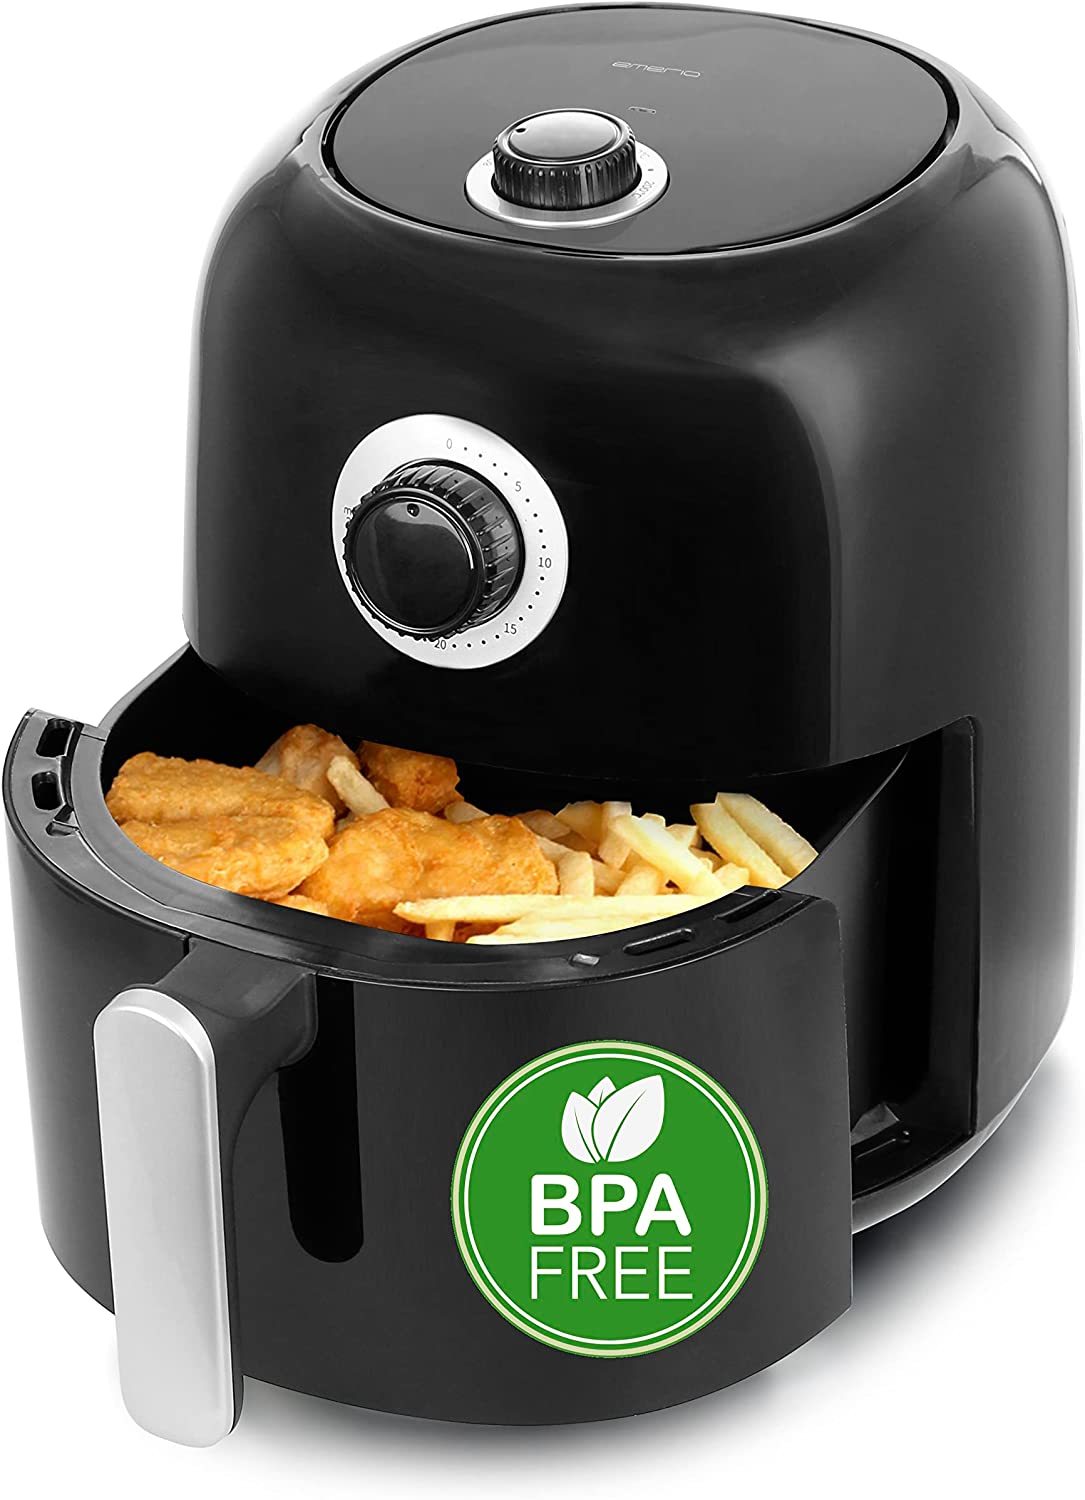 Emerio AF-125770 Smartfryer Airfryer Hot Air Frying With Hot Air Without Additional Oil Healthy Frying 3.0 Litre Volume Cool Touch BPA Free Quick Heating 1450 Watt